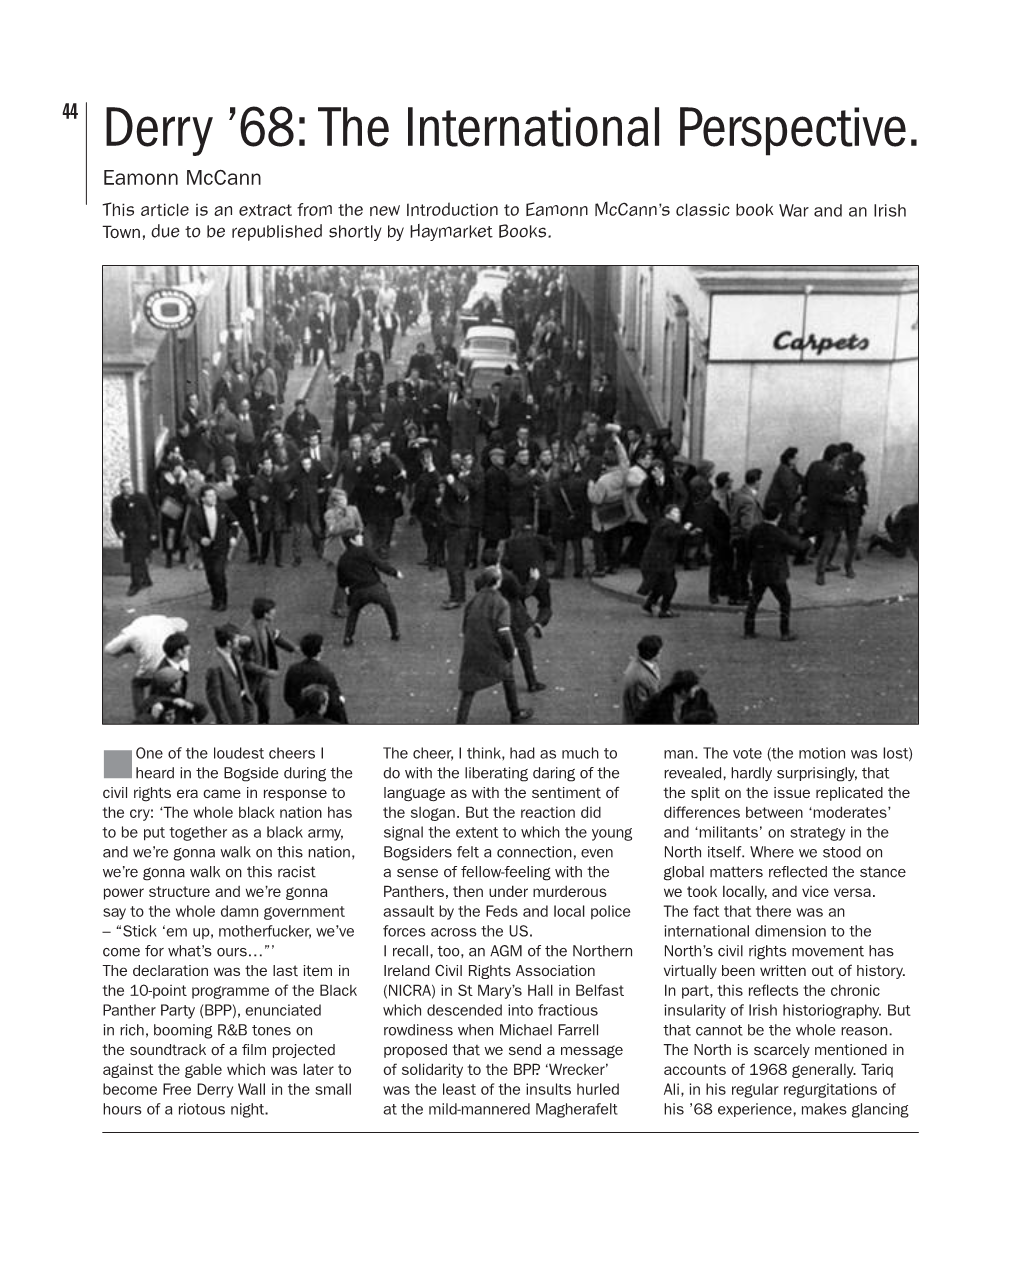 Derry '68: the International Perspective